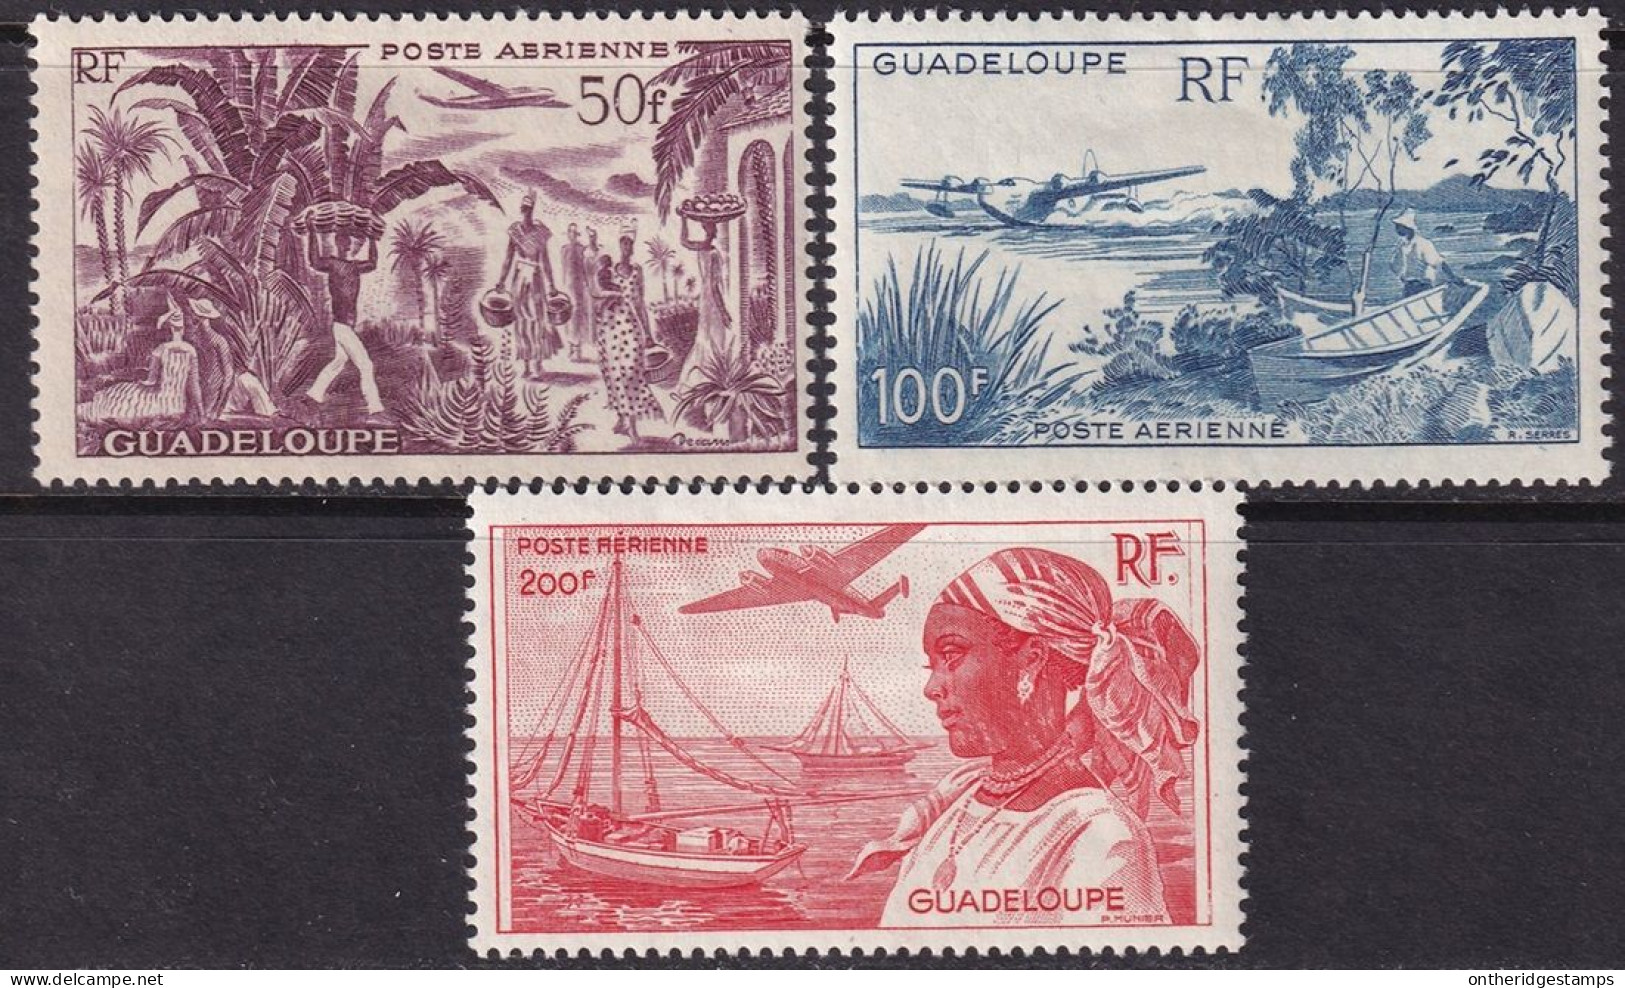 Guadeloupe 1947 Sc C10-2 Yt PA13-5 Air Post Set MH* Heavy Hinges - Posta Aerea